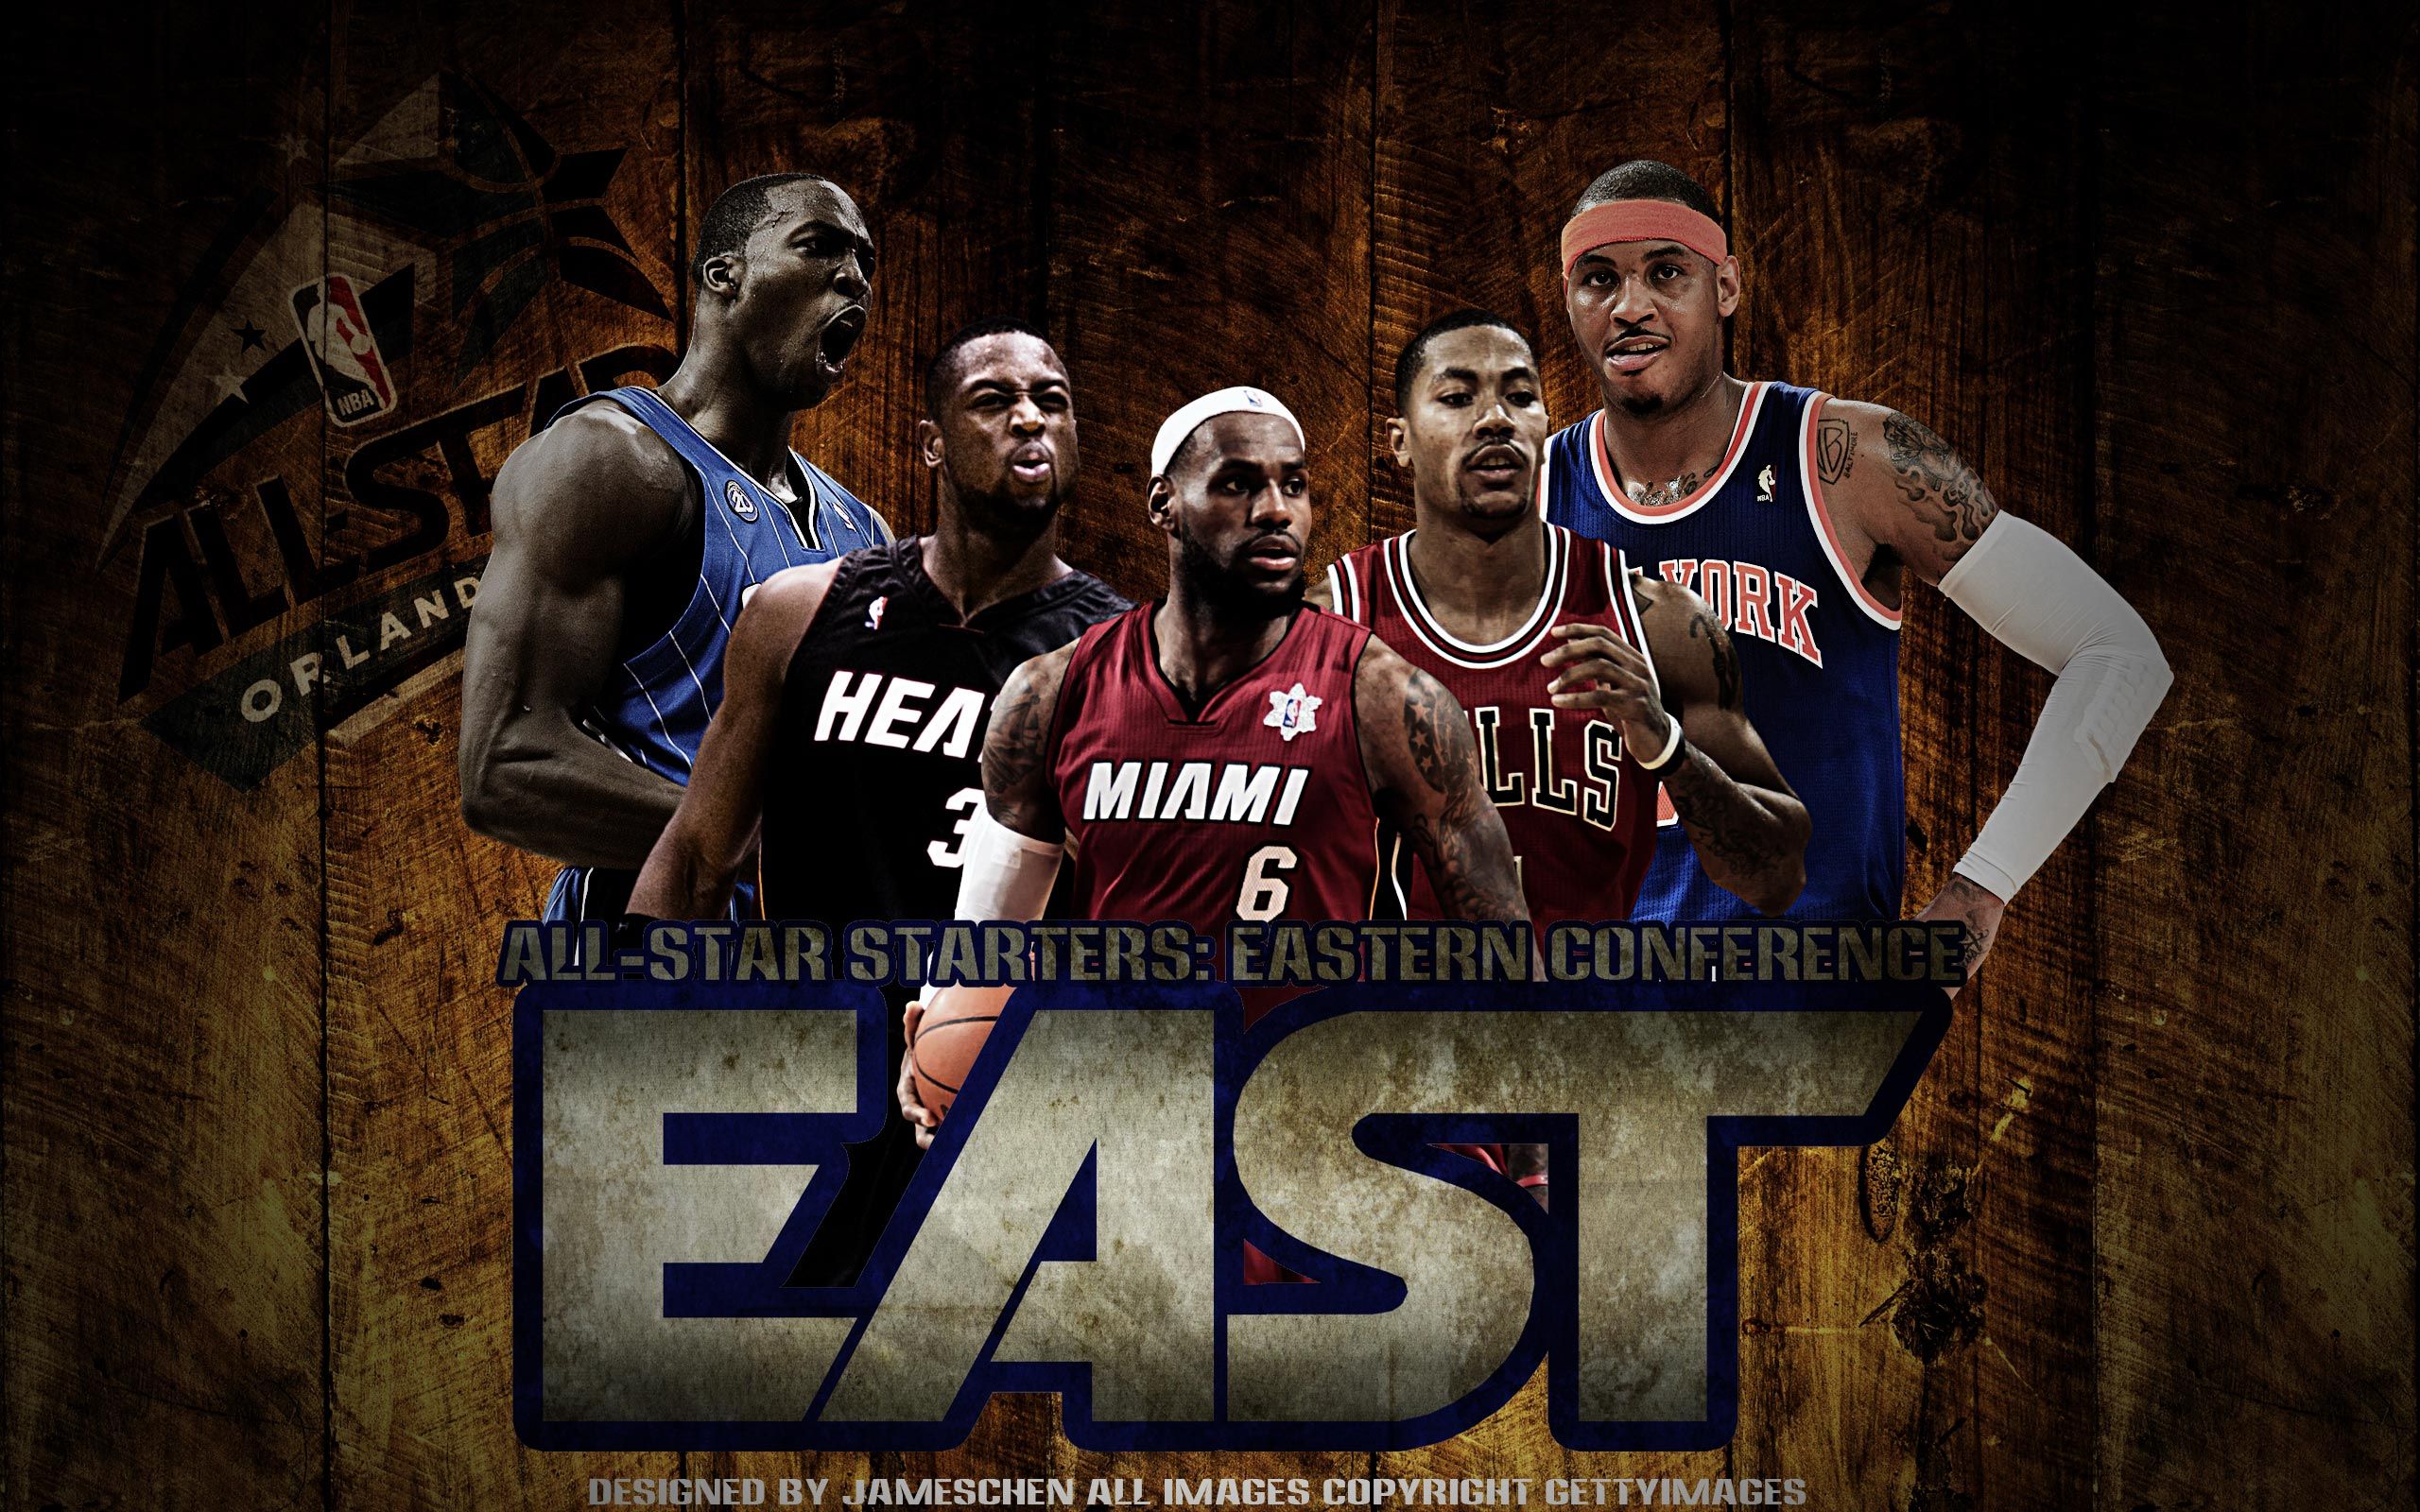 Free download 2012 NBA All Star East Starters 25601600 Wallpaper